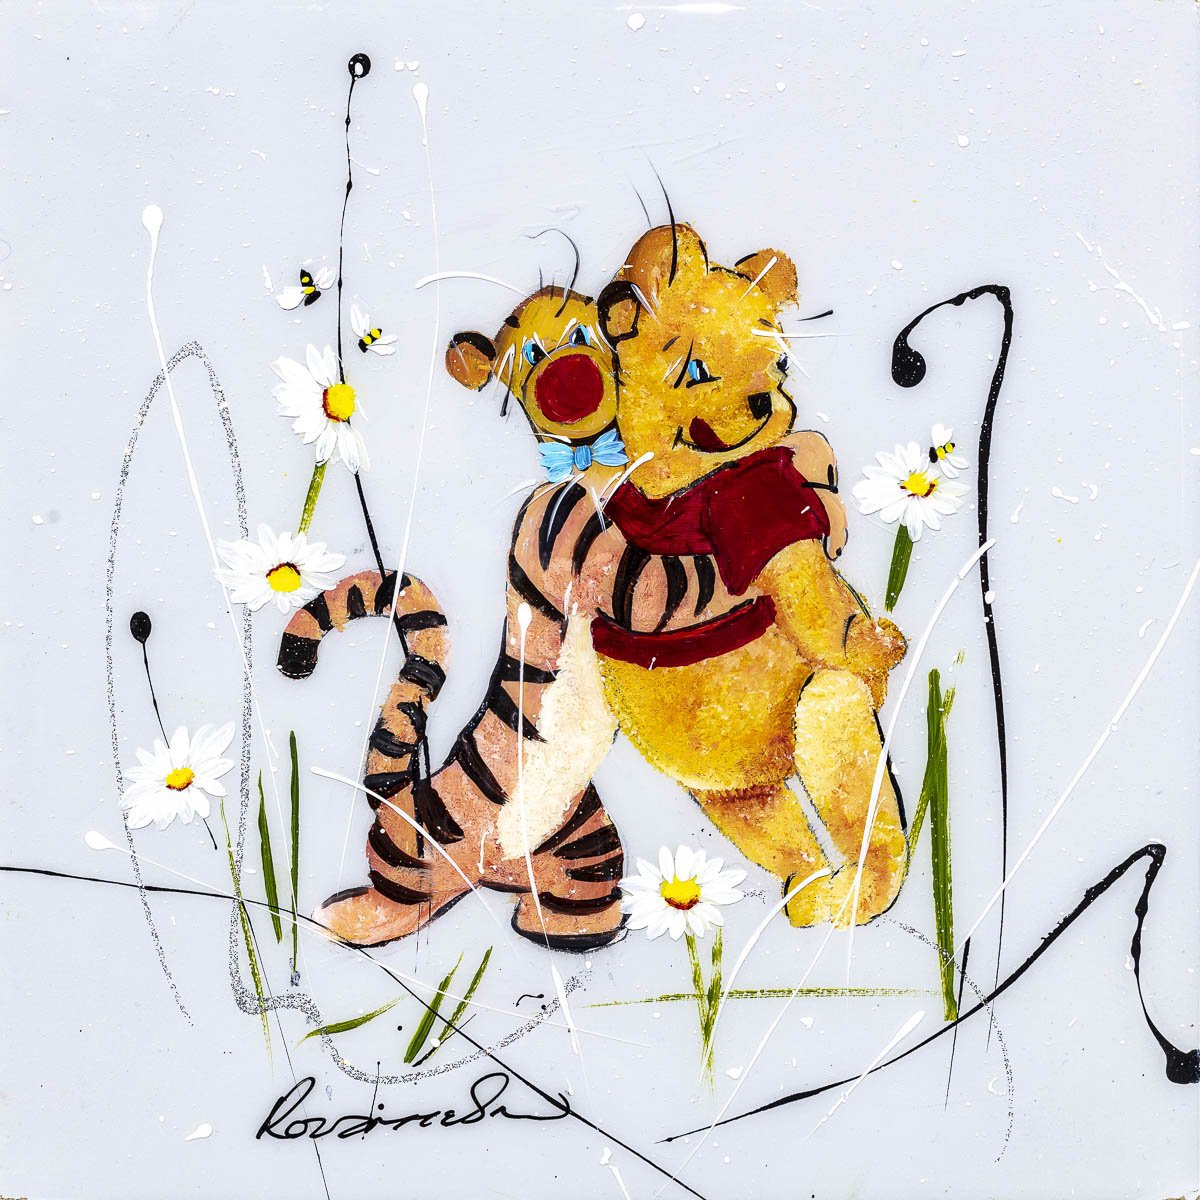 &#39;Oh, bother&#39; - Original Set of 4 Rozanne Bell